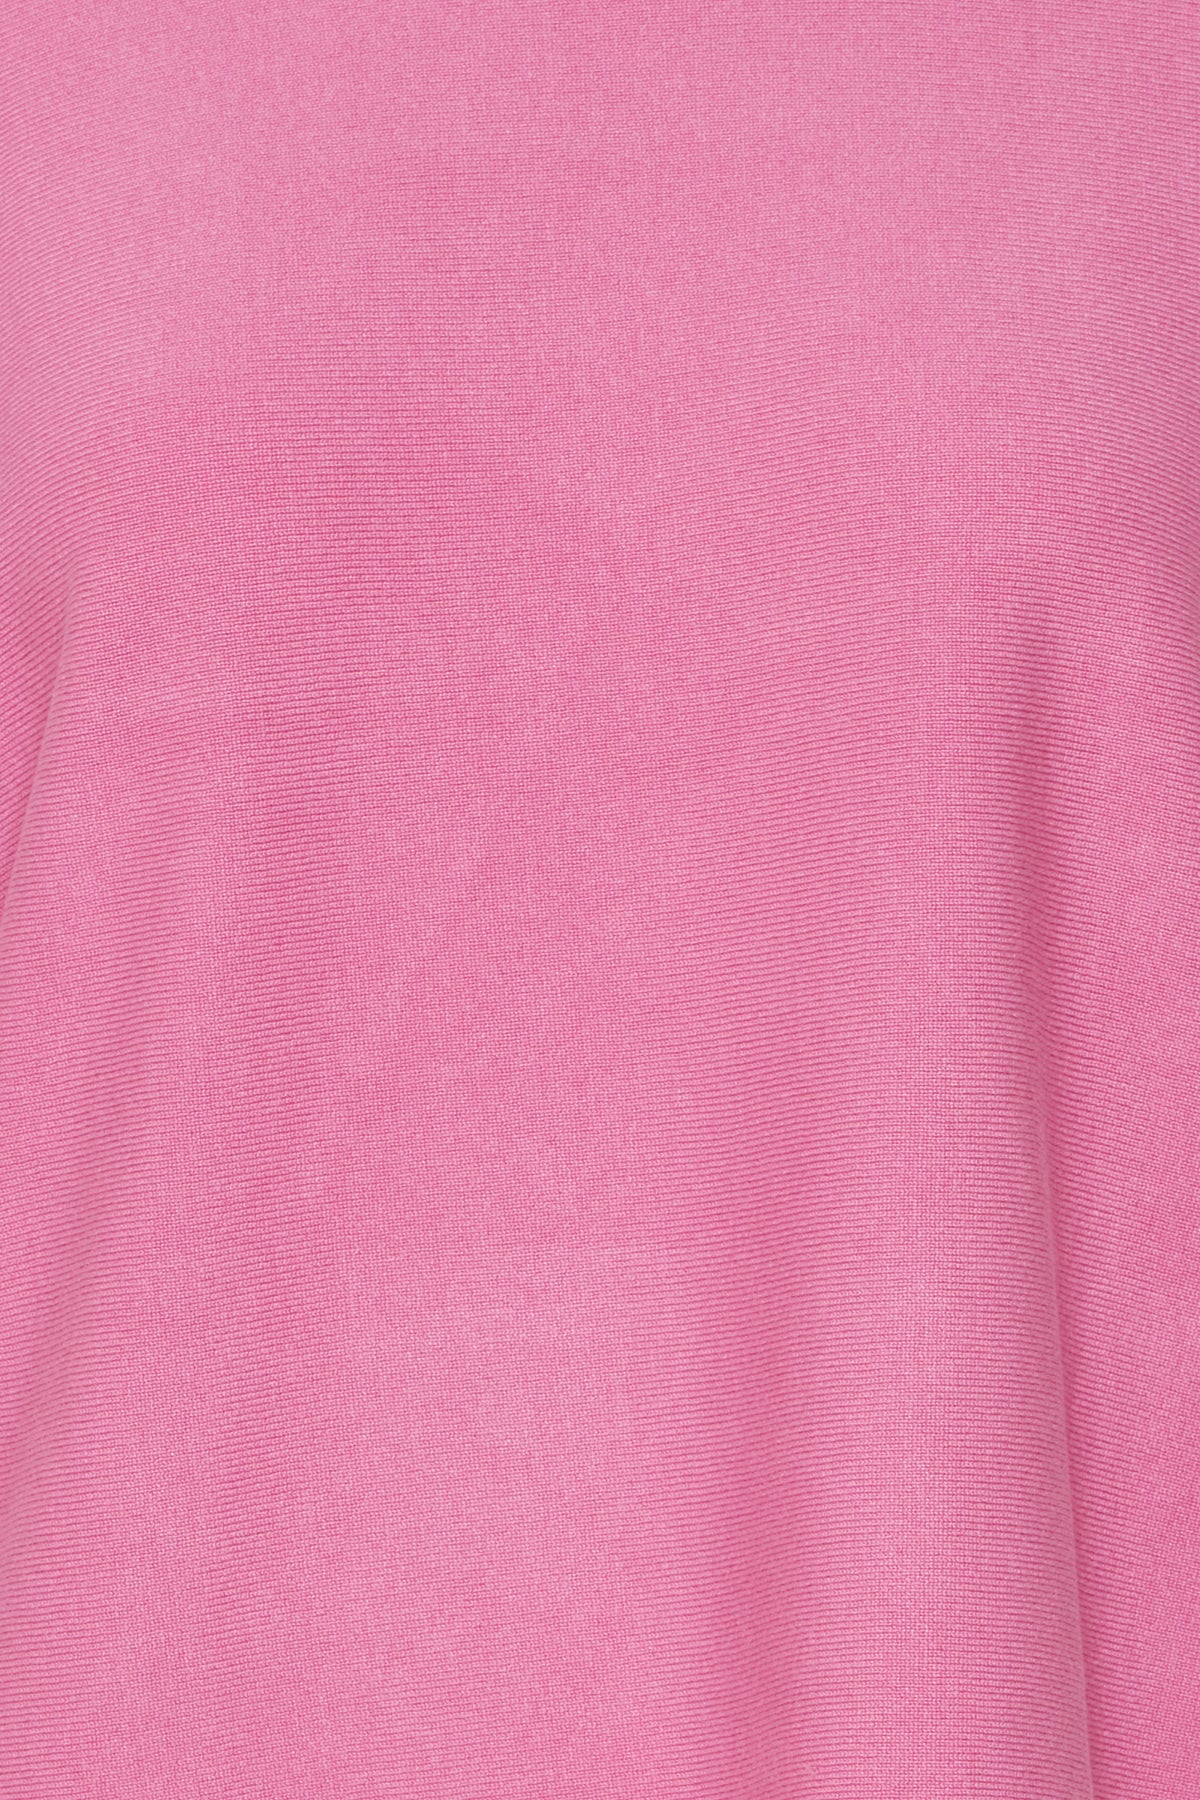 B.Young Bymmorla Super Pink Oversized Knit, 20814389